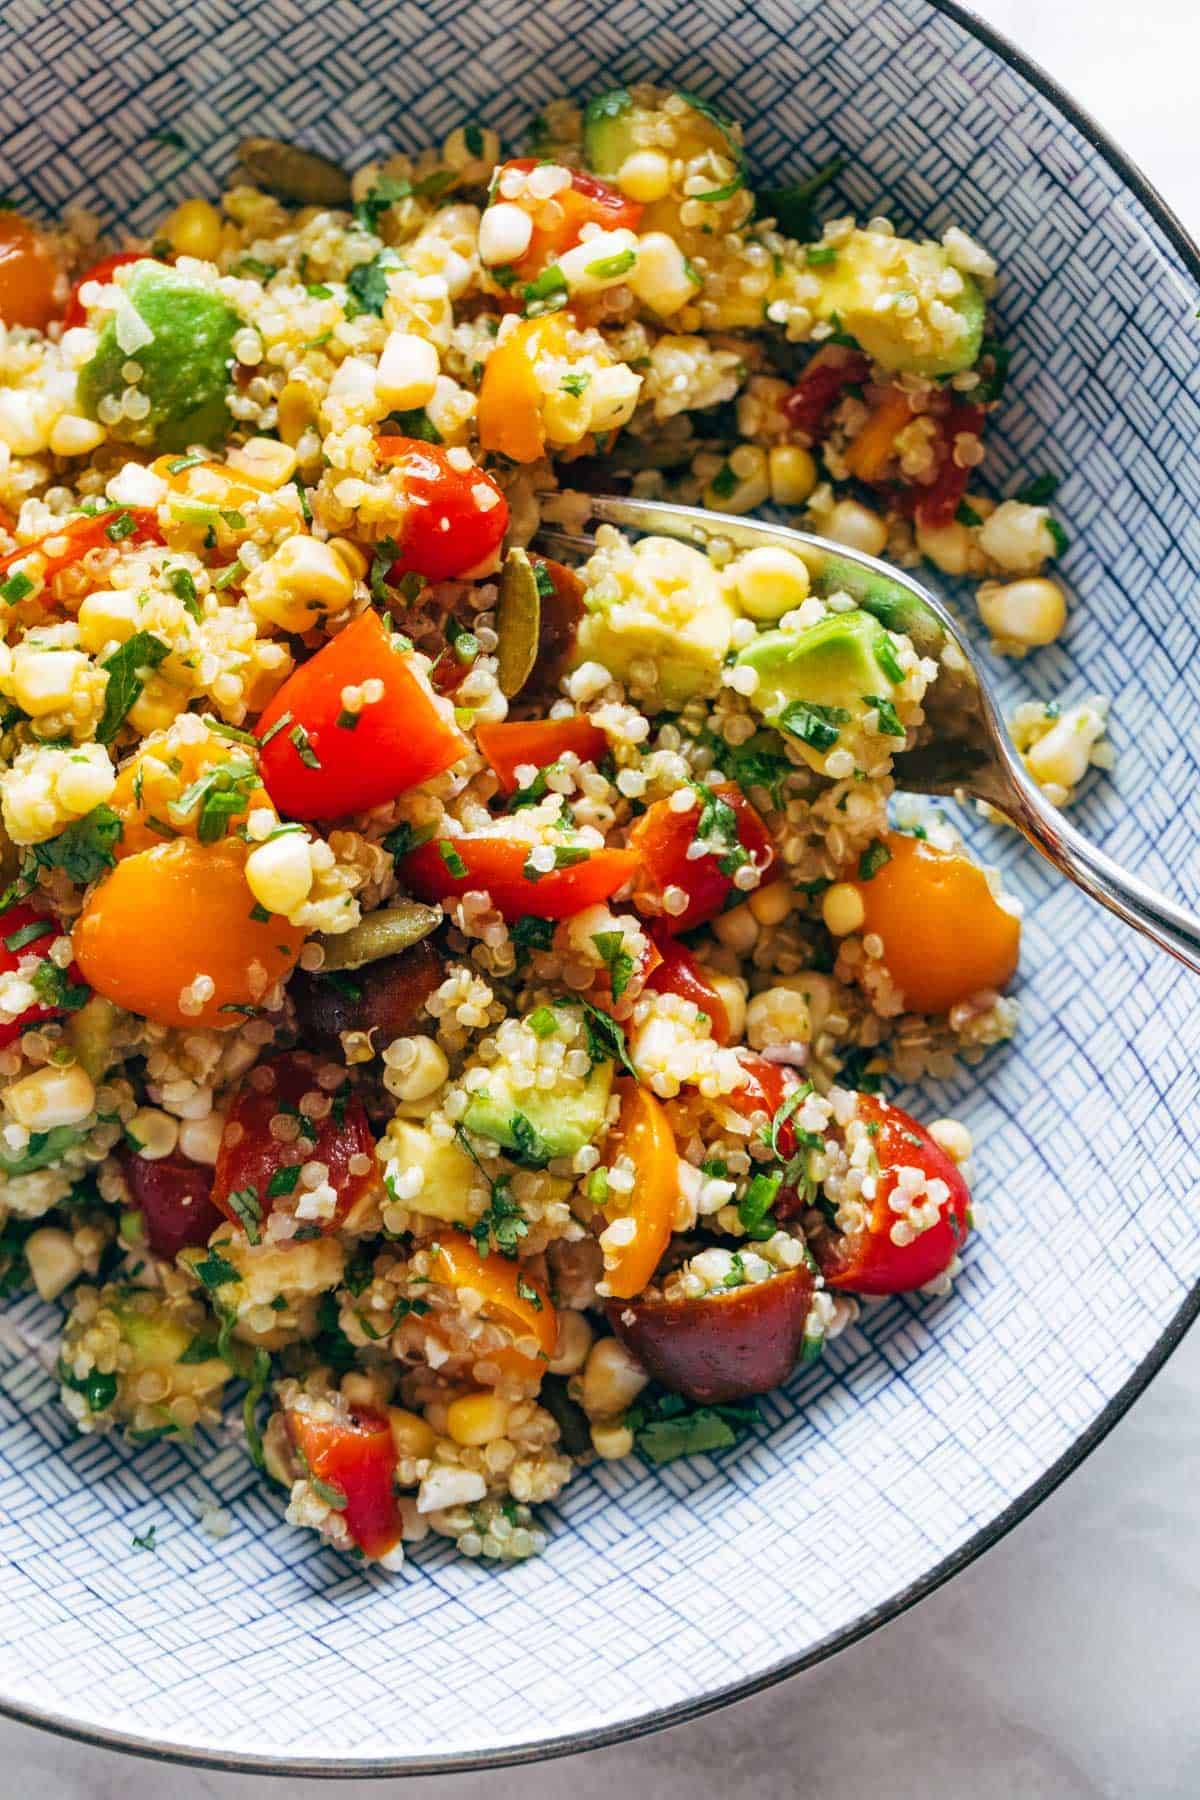 Corn, Avocado, and Quinoa Salad in a bowl with marinated tomatoes.